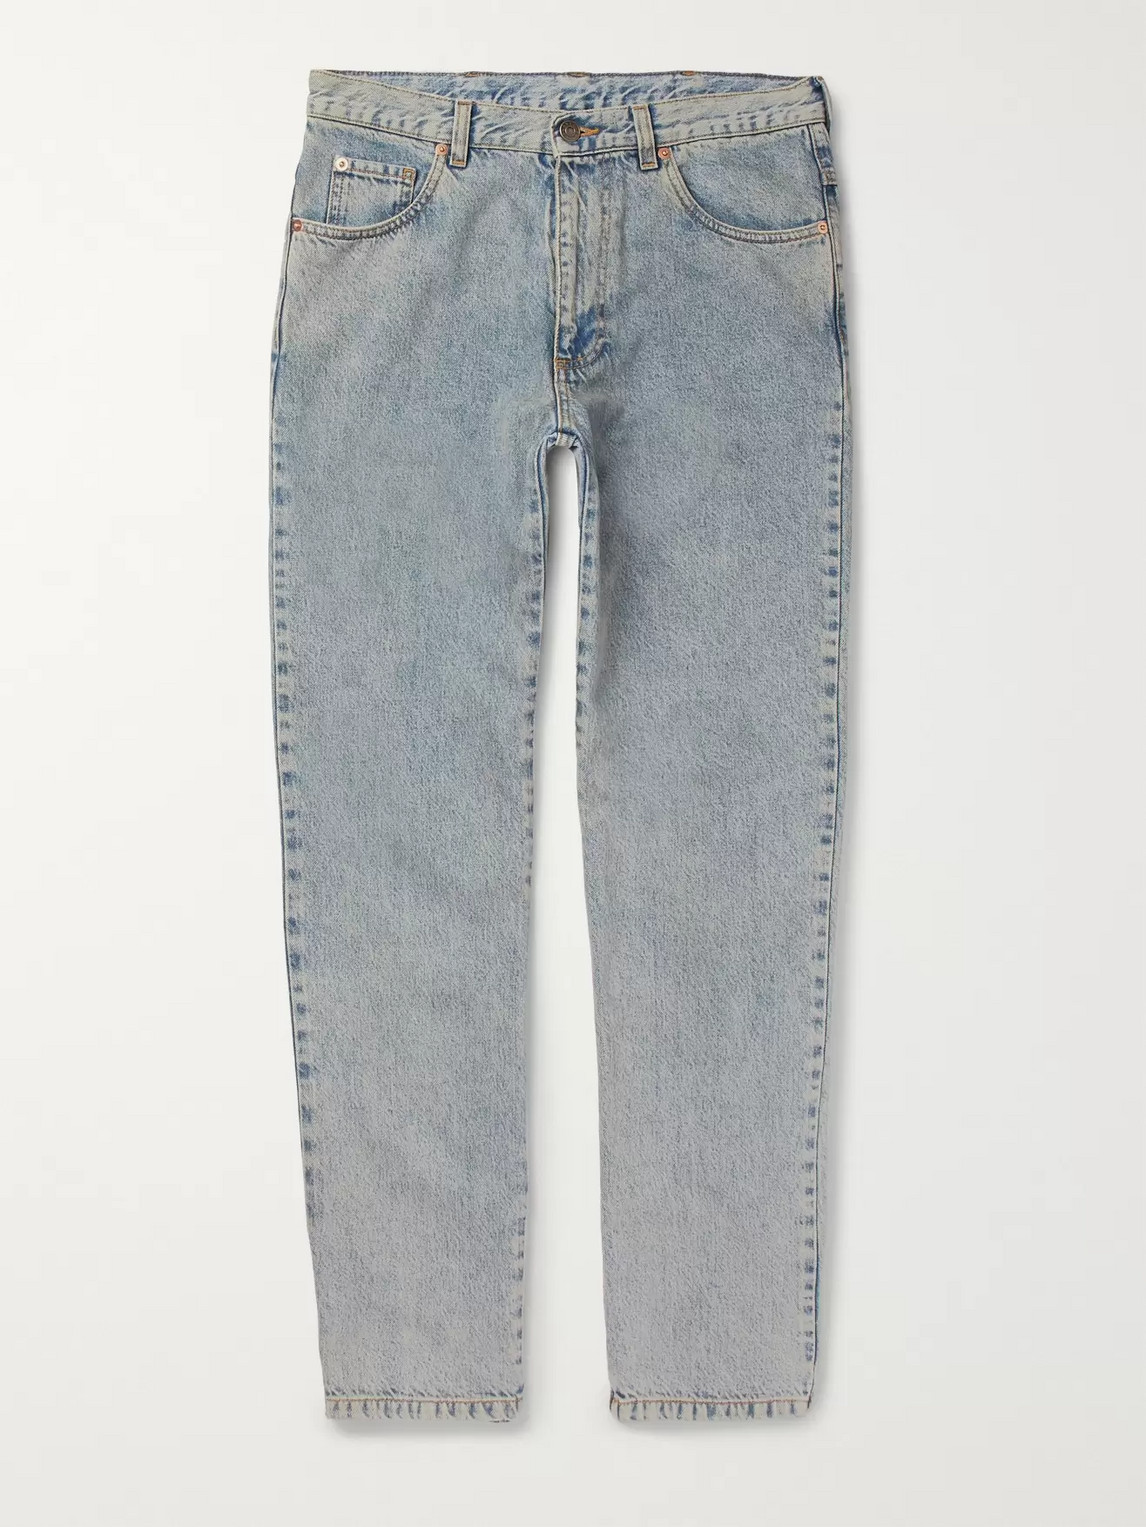 GUCCI PRINTED WASHED-DENIM JEANS